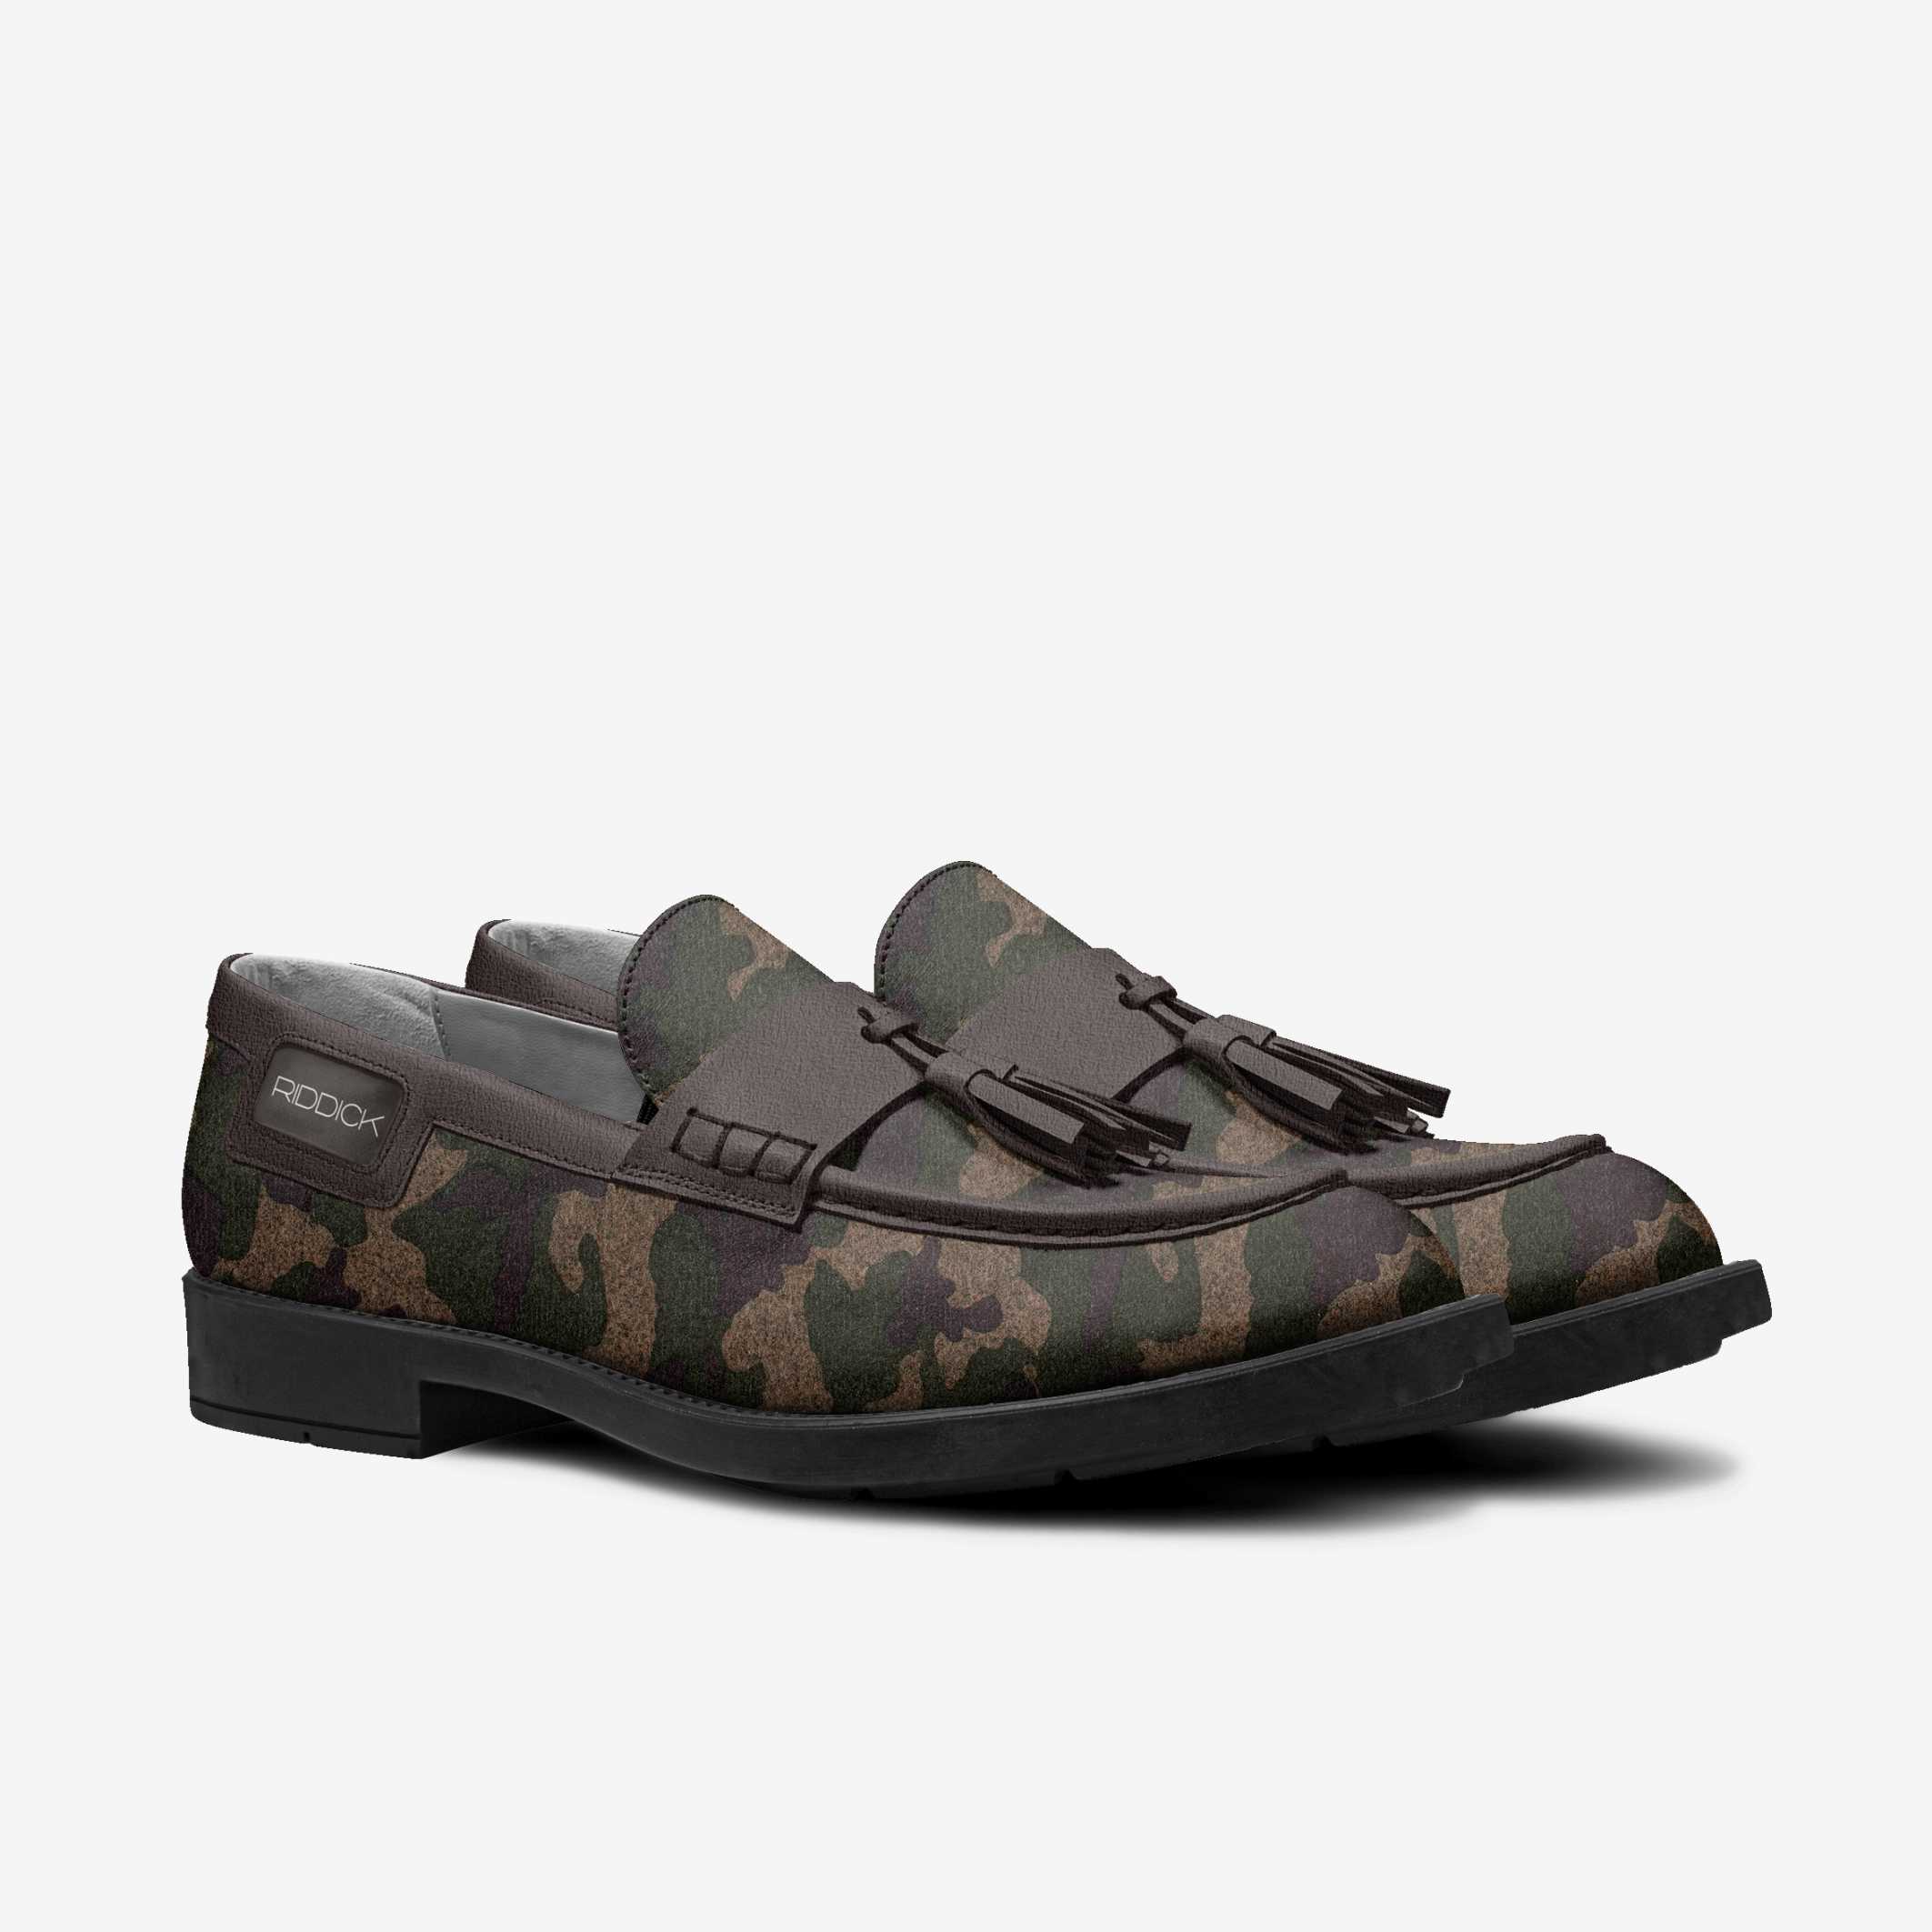 EXEC, THE TASSEL (IN CAMO) - Riddick Shoes Shoe Riddick Shoes   